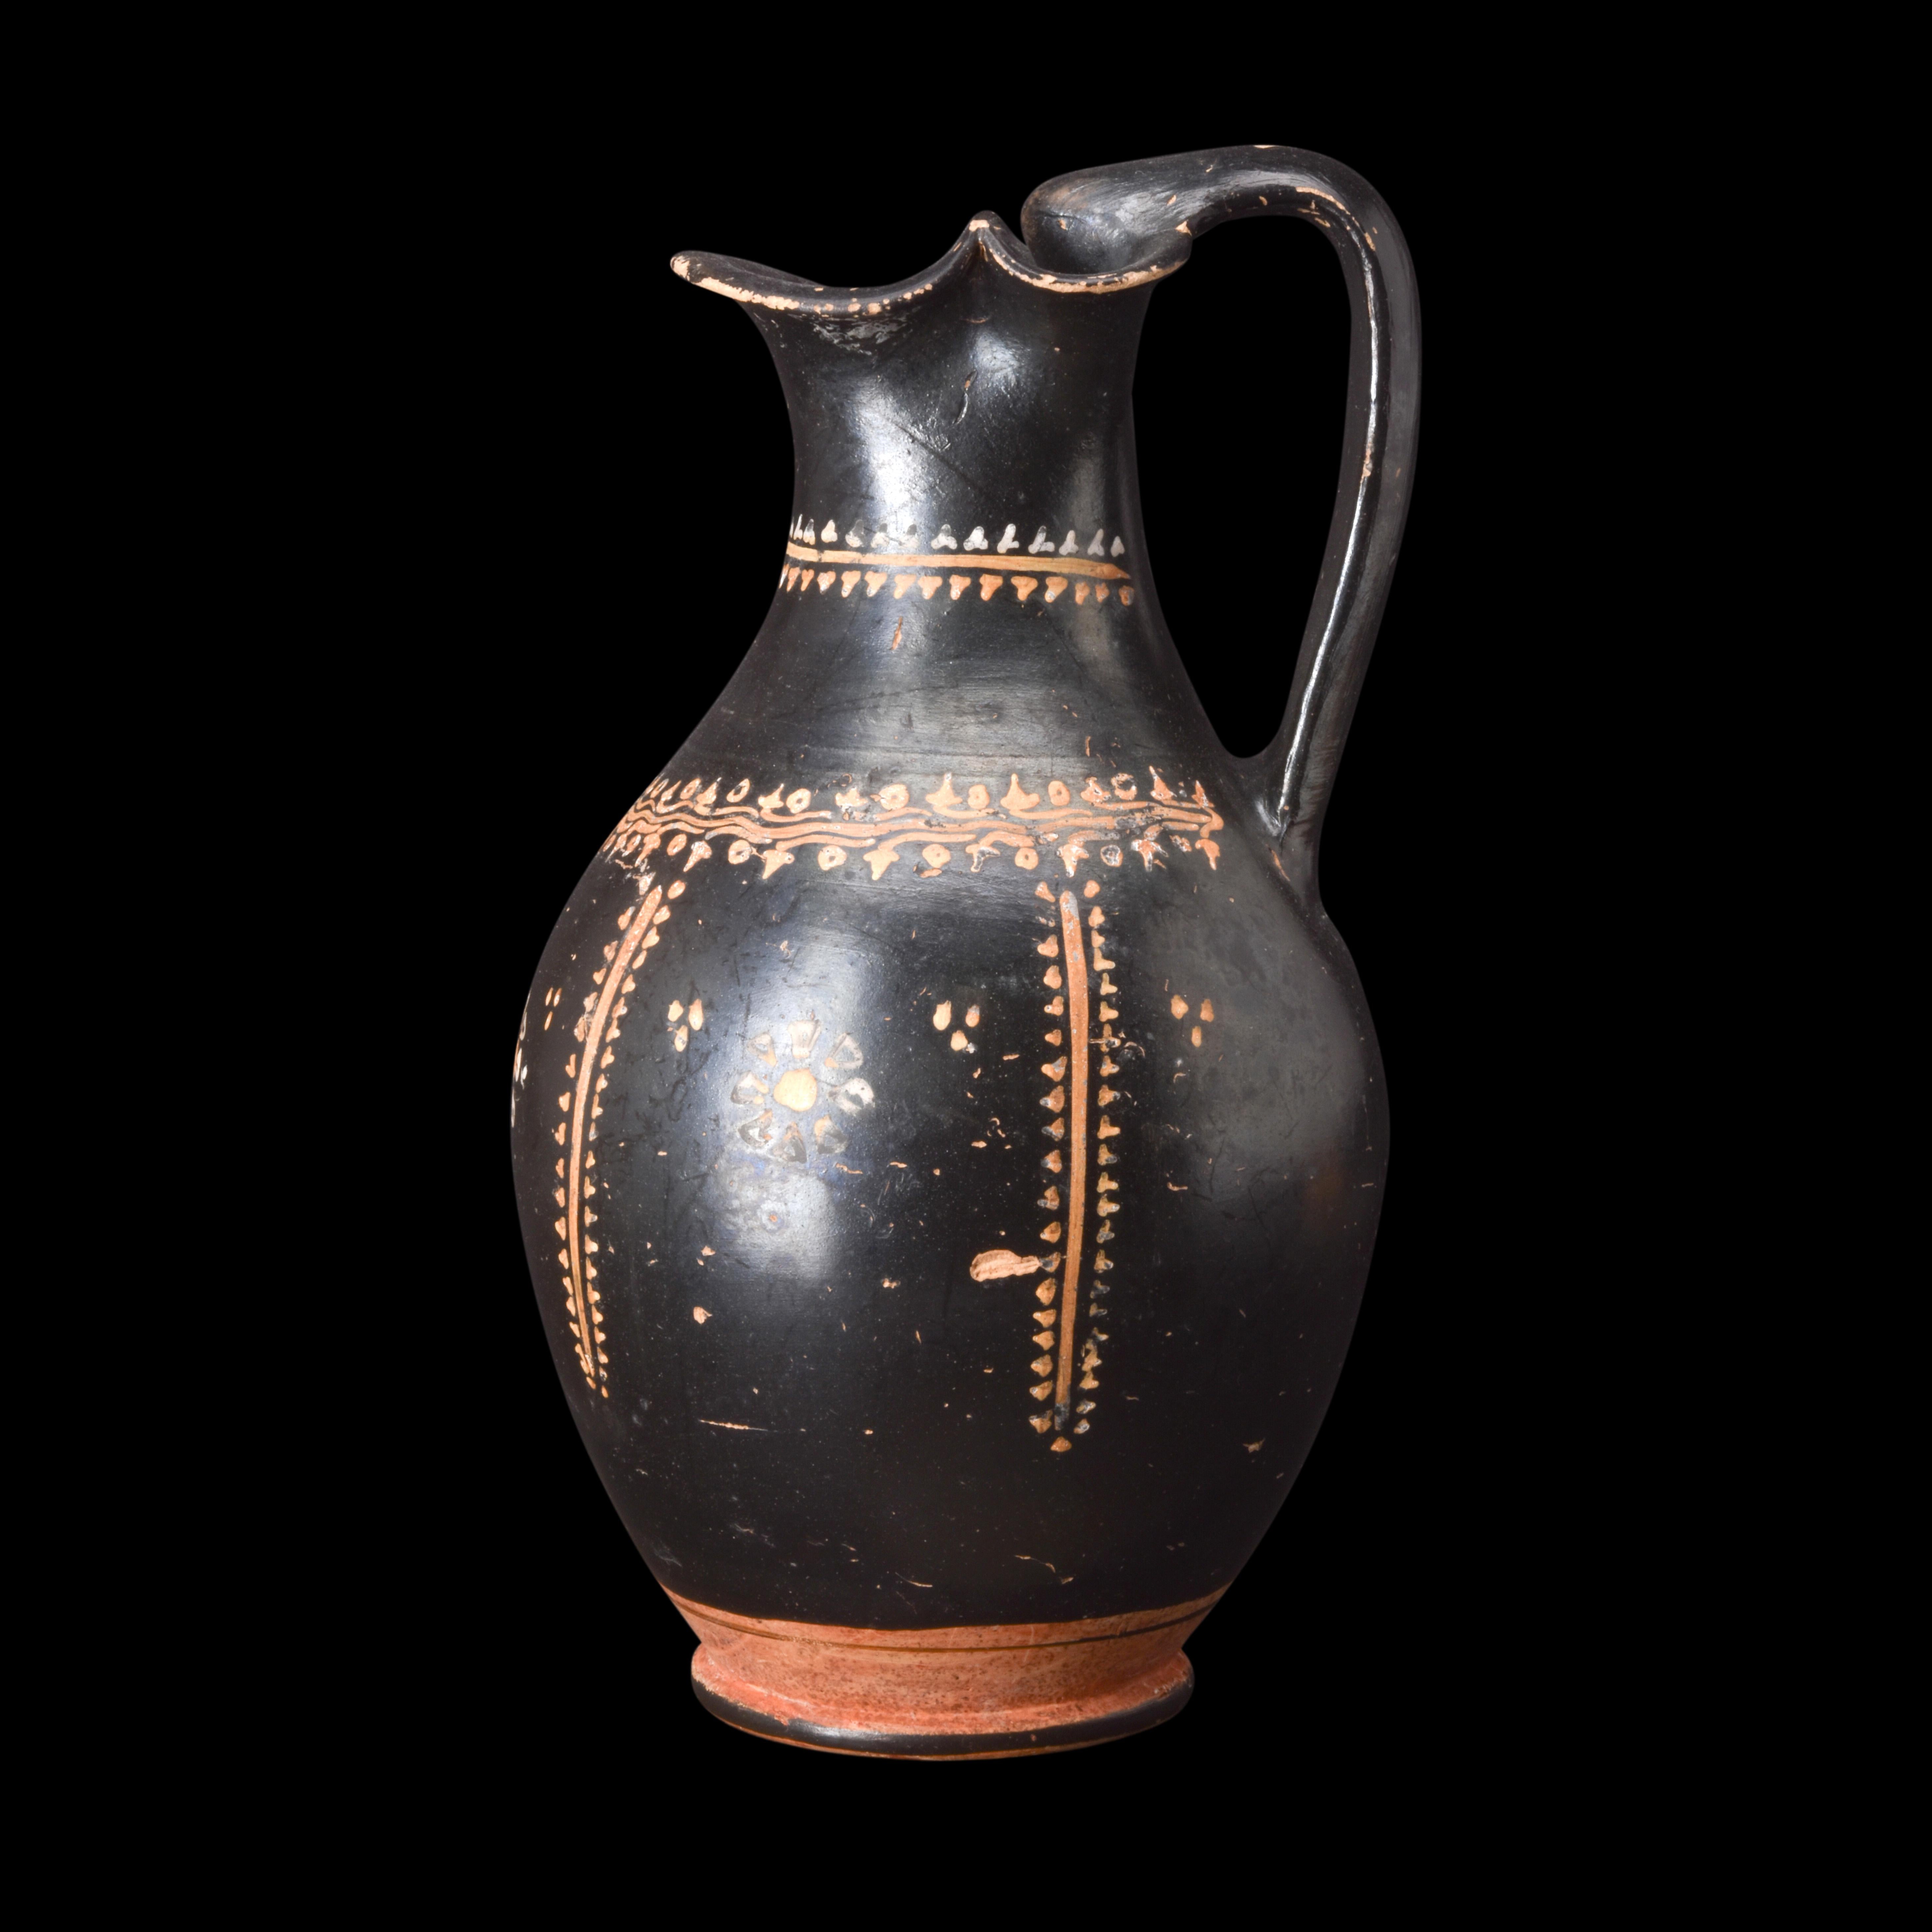 A black-glazed pottery oinochoe that boasts distinctive features that characterise this specific type of Greek pottery. The vessel has a rounded body that exhibits delicate fluting that gracefully tapers towards the foot. The neck of the vessel